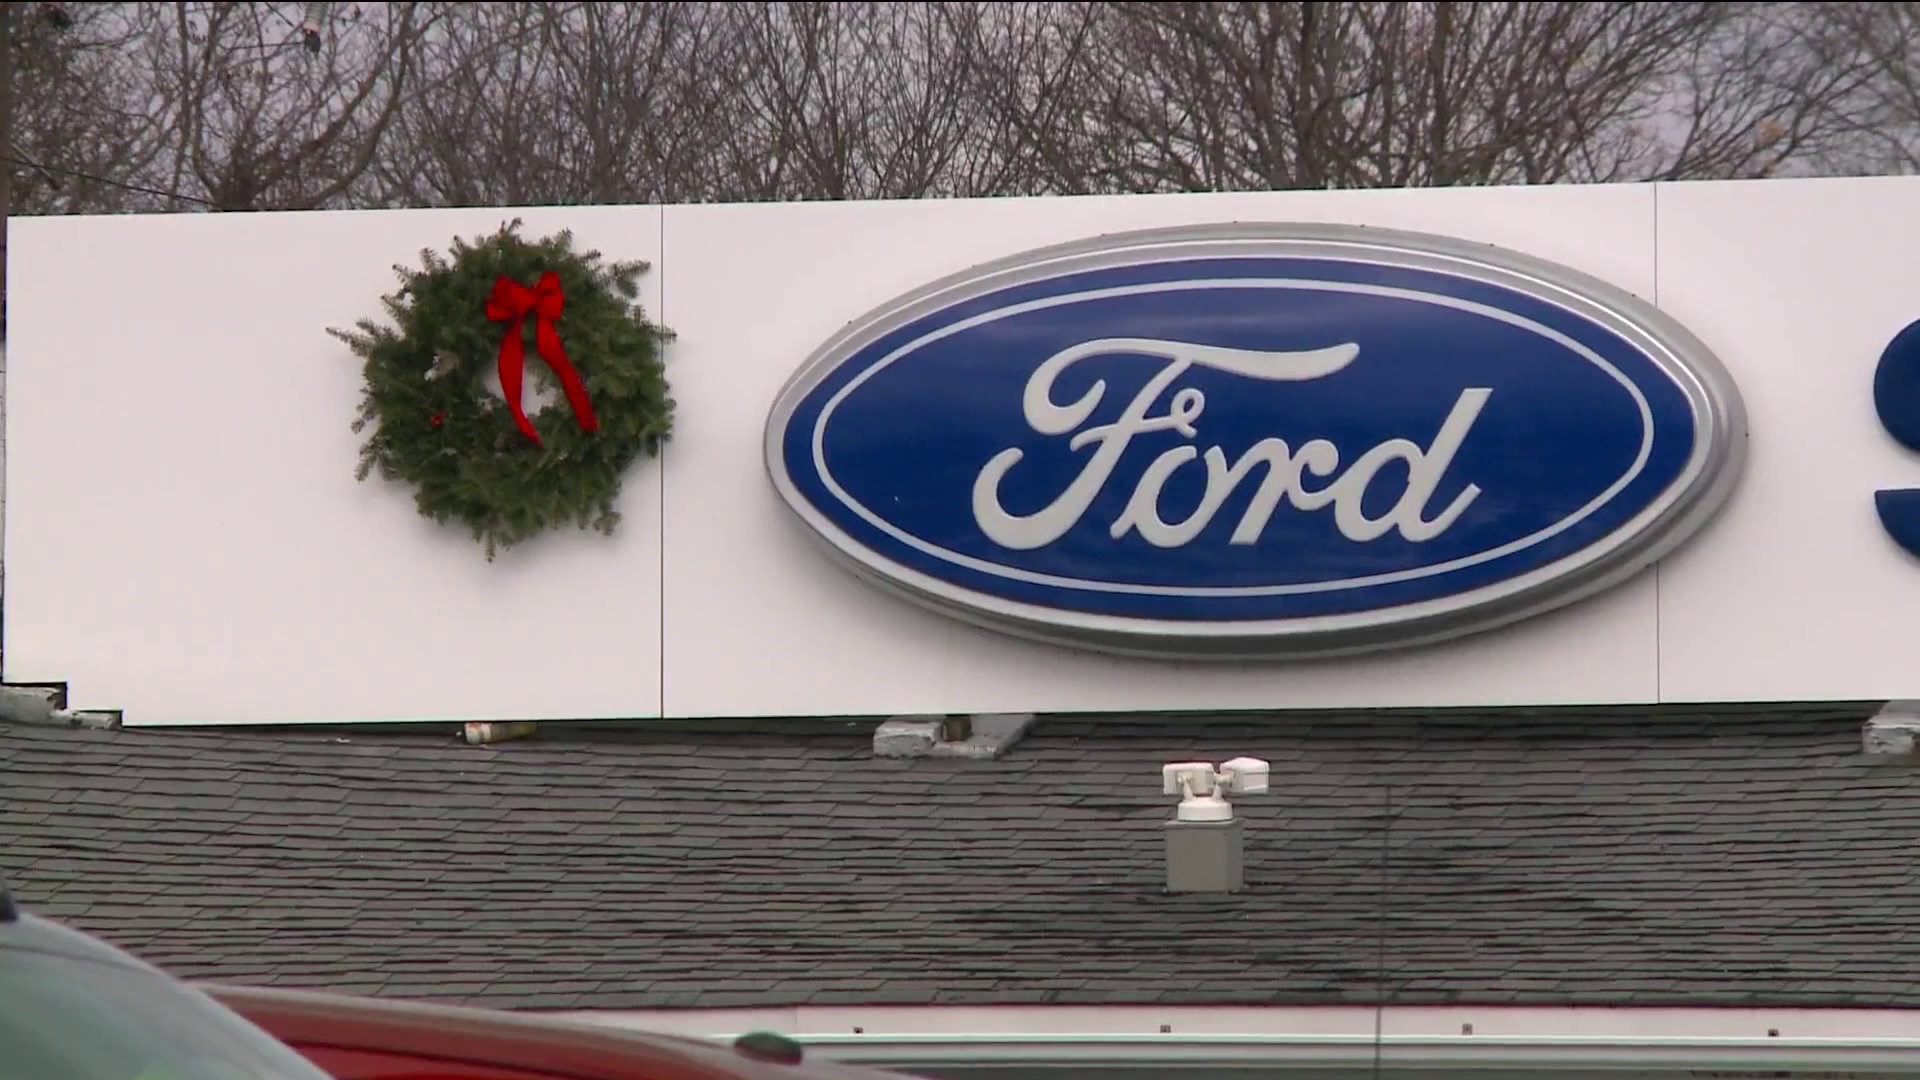 Teens Caught After Stealing Two Cars From Saybrook Ford